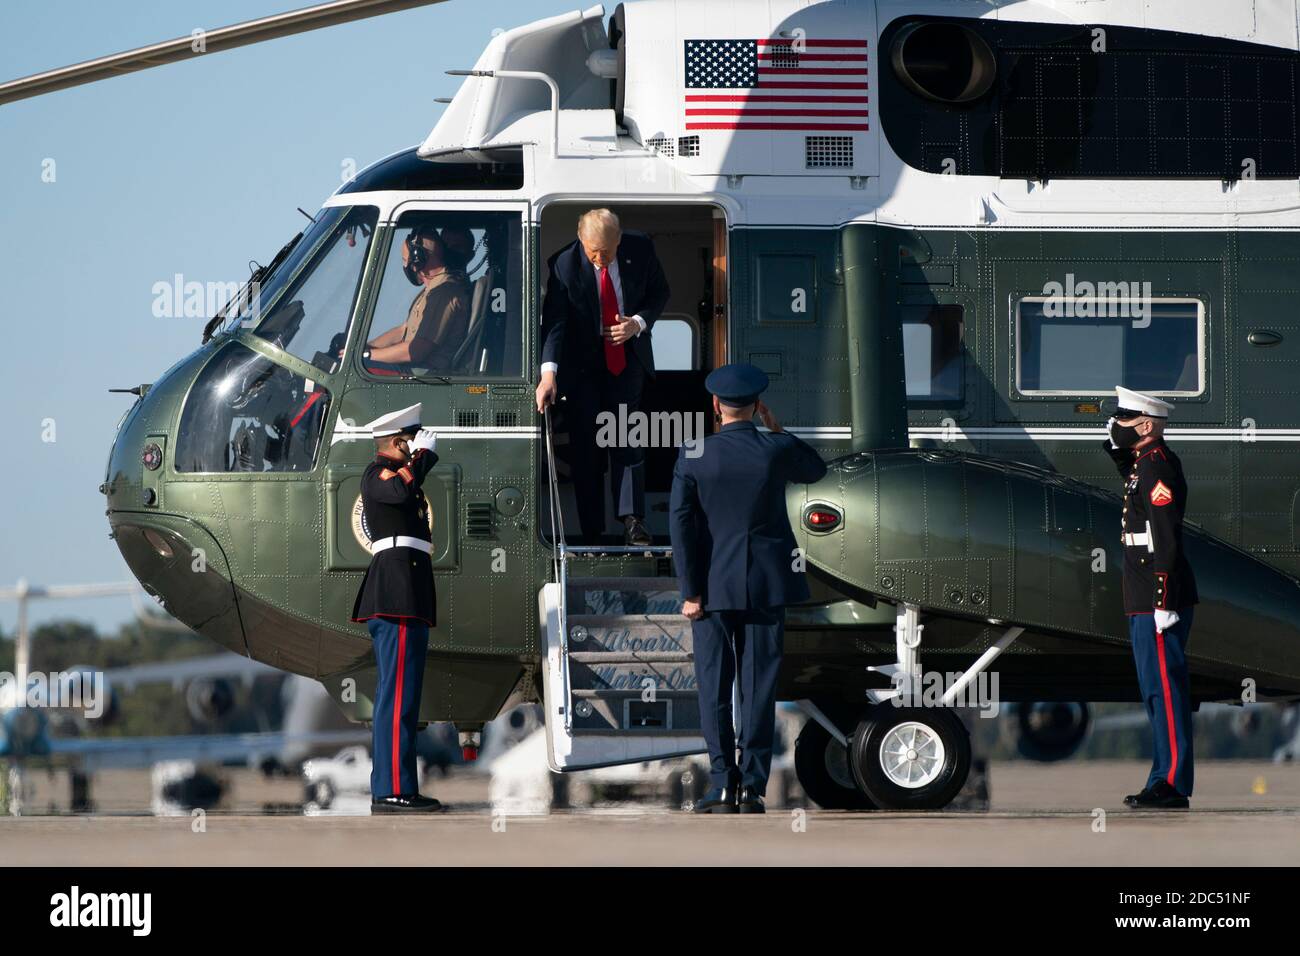 US President Donald Trump exits Marine One as he boards Air Force One on October 14, 2020 at Joint Base Andrews in Maryland. Trump is scheduled to fly to Des Moines, Iowa for a Make America Great campaign rally before returning to the White House tonight. Credit: Alex Edelman/The Photo Access Stock Photo